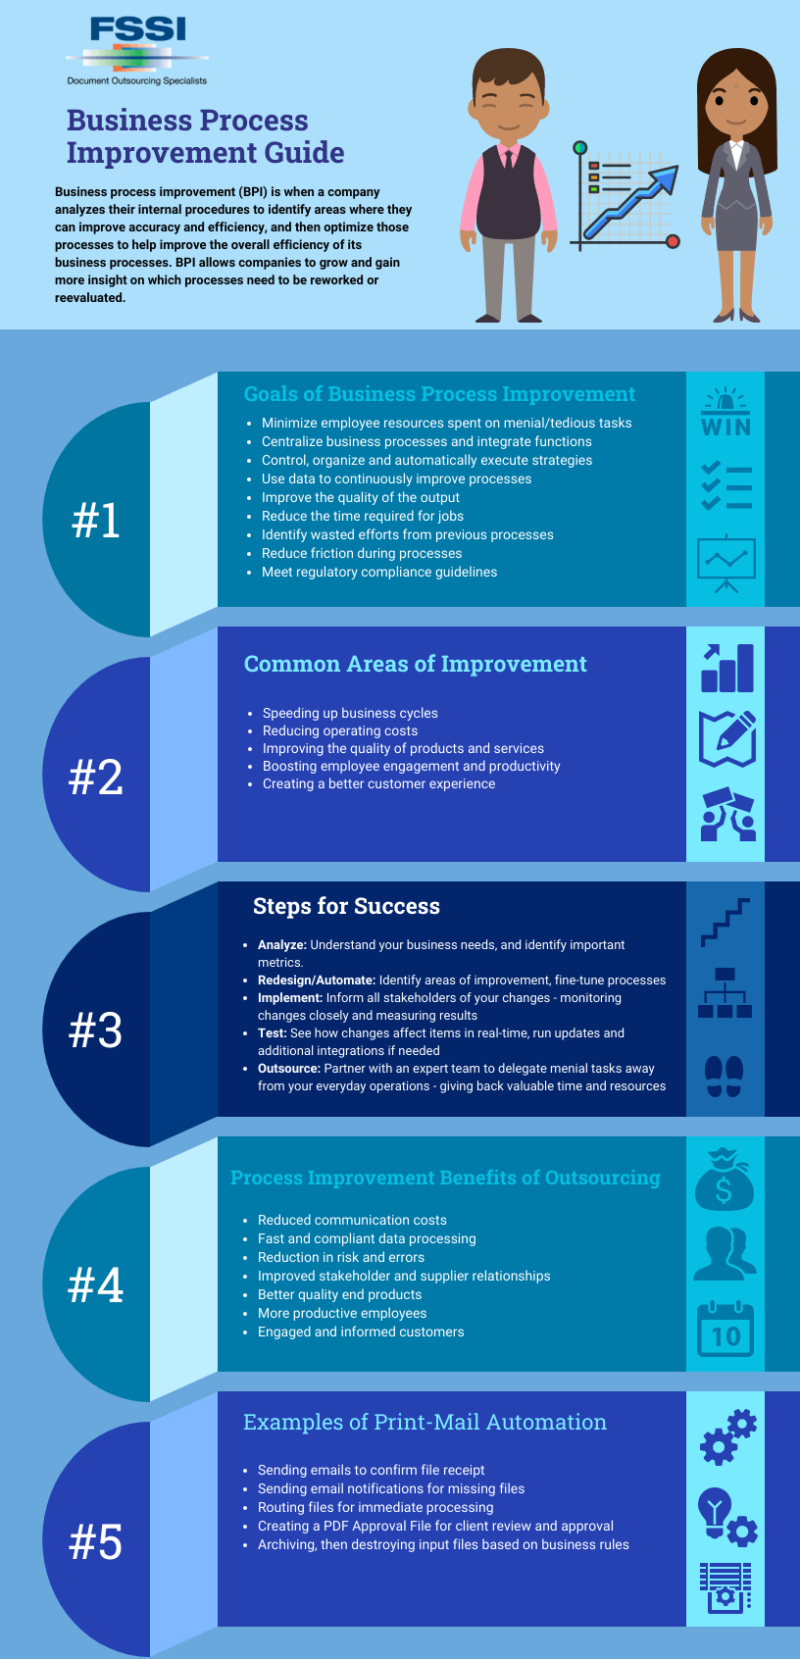 business process improvement guide graphic